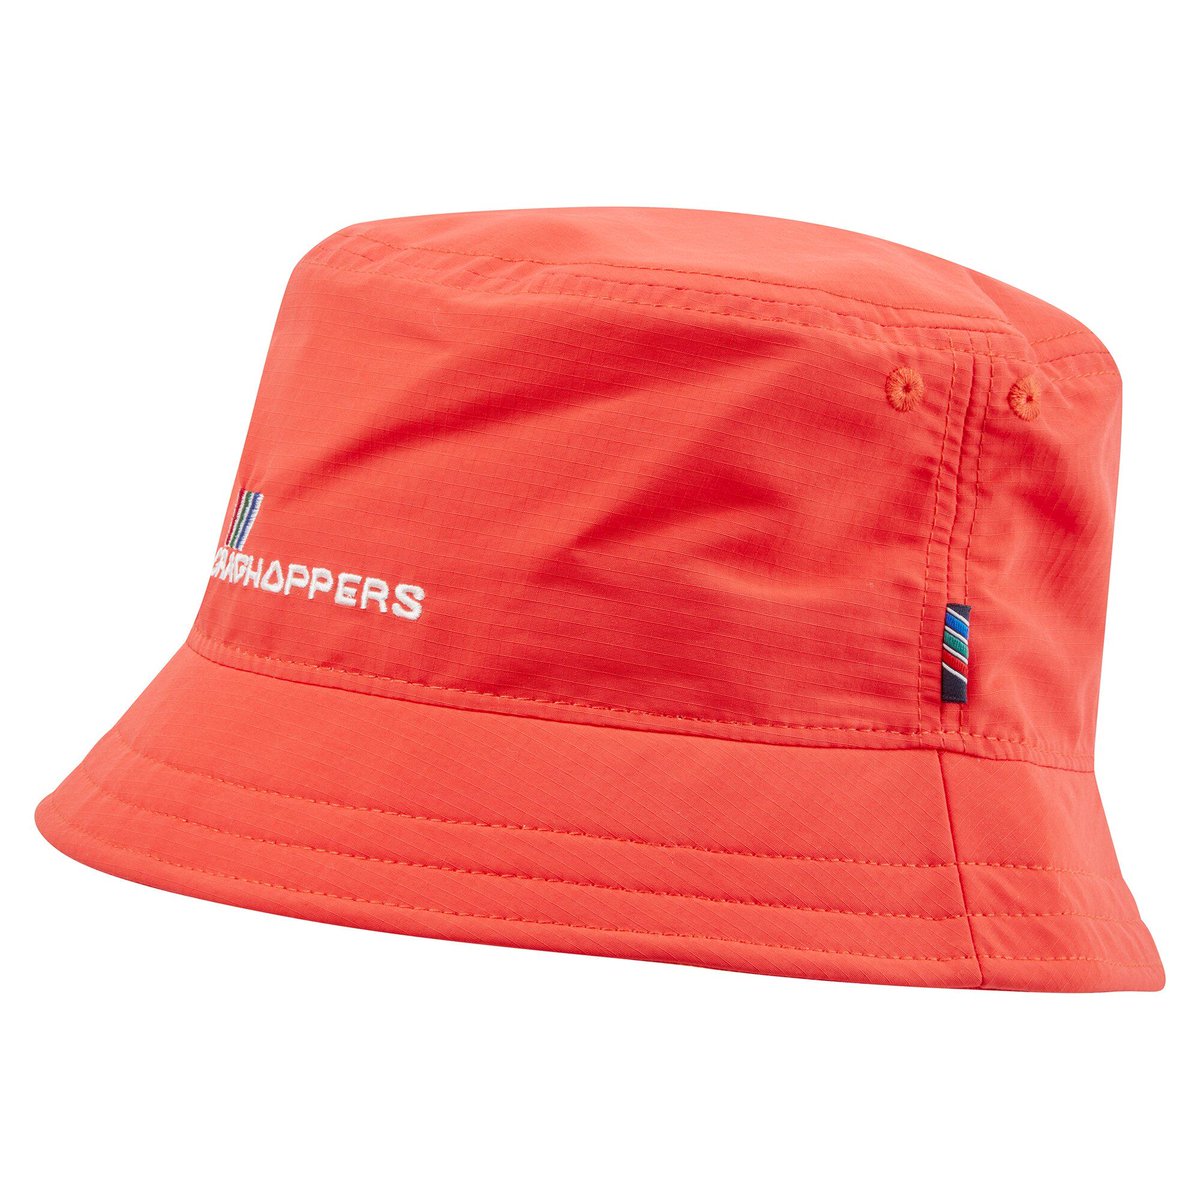 It's HOT so we're giving away one of our bucket hats 😎#WinItWednesday To enter: ✅ Follow @CraghoppersUK 🔁 RT this post 💬 Comment which colour you'd like using #craghoppers Winner announced 14th July at 9am. T&Cs apply.